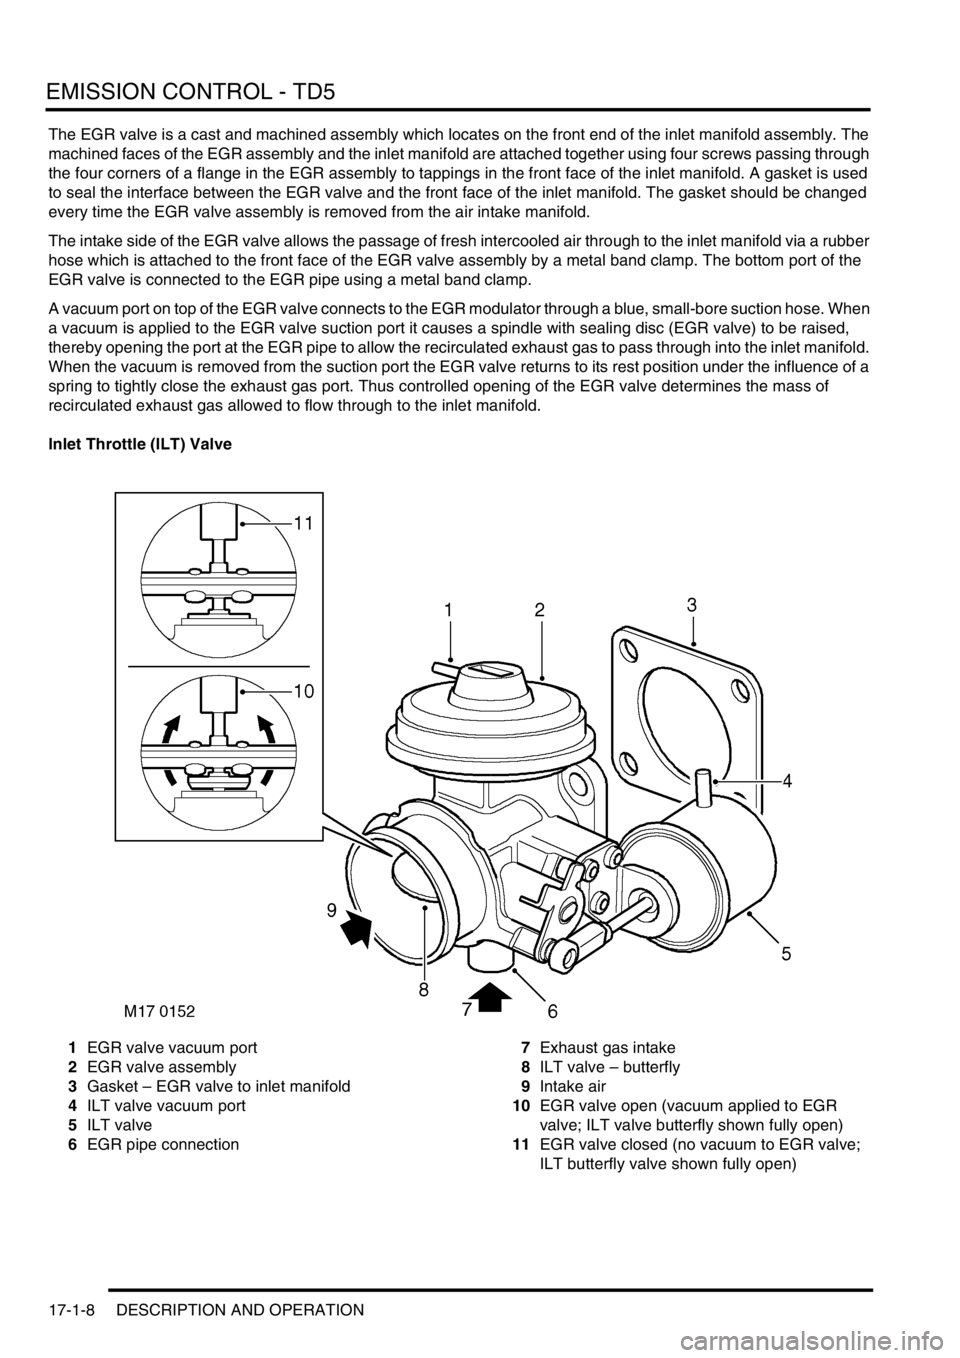 LAND ROVER DISCOVERY 2002  Workshop Manual EMISSION CONTROL - TD5
17-1-8 DESCRIPTION AND OPERATION
The EGR valve is a cast and machined assembly which locates on the front end of the inlet manifold assembly. The 
machined faces of the EGR asse